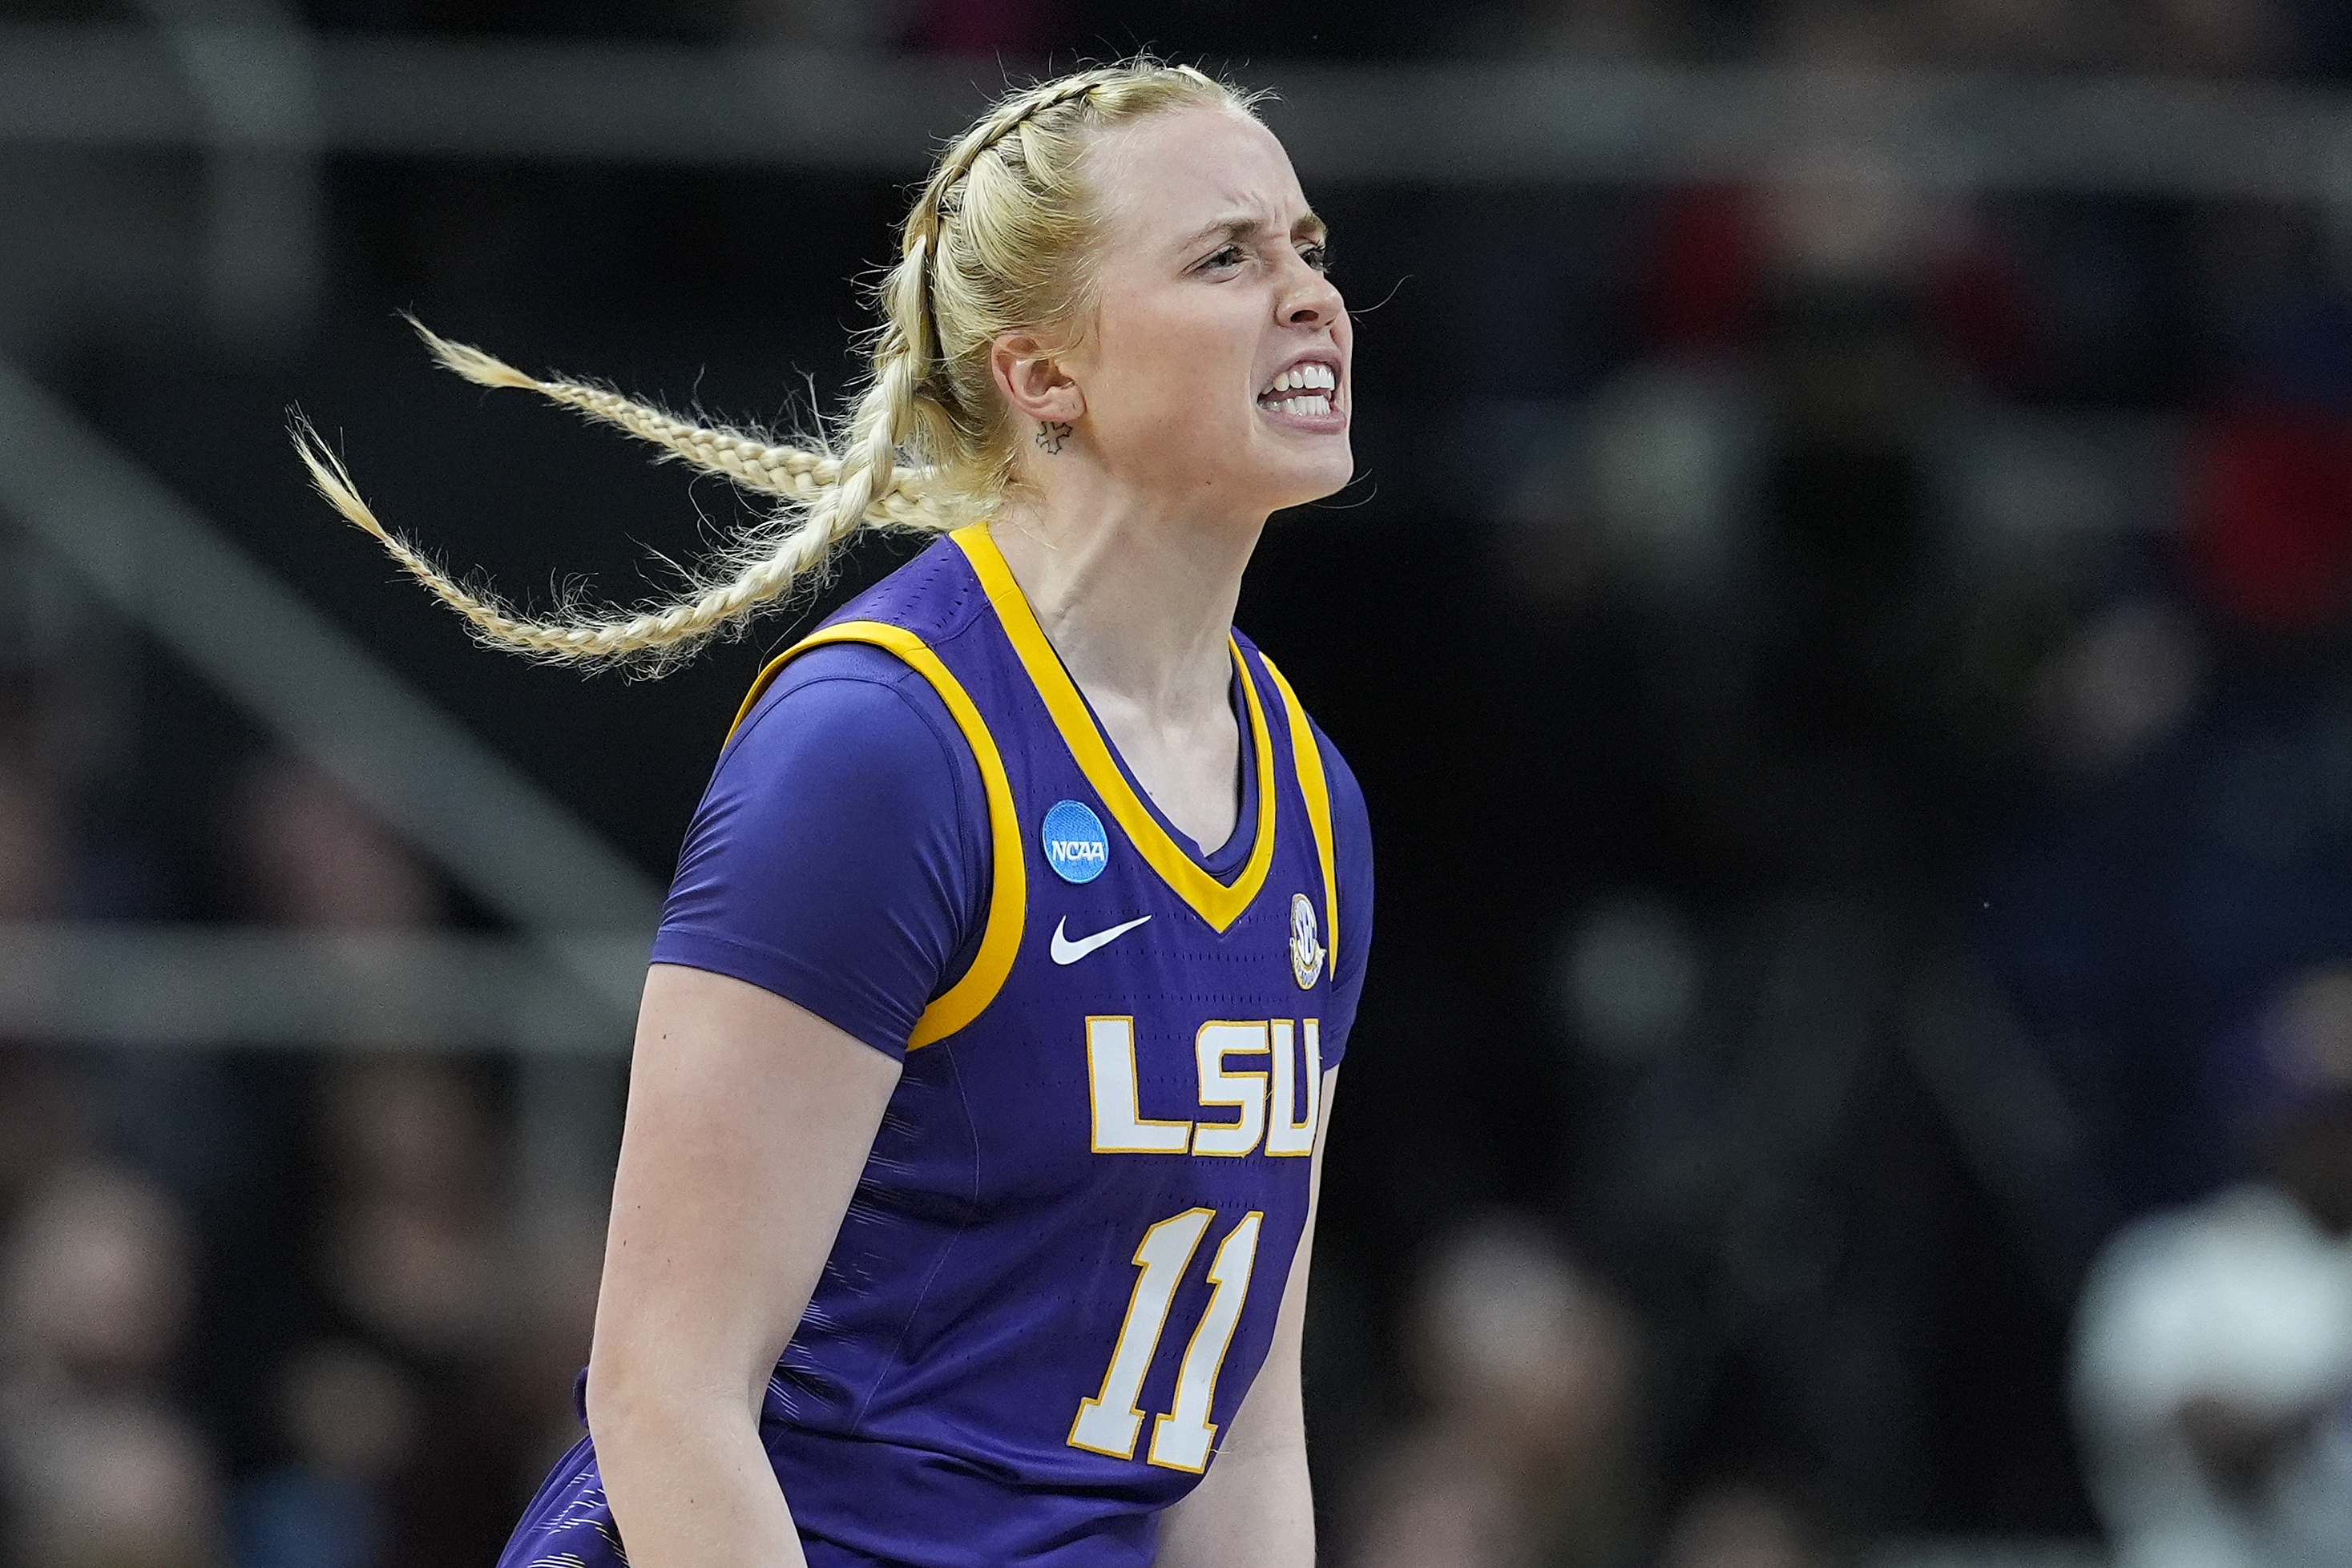 Hailey Van Lith is transferring from LSU after one season.